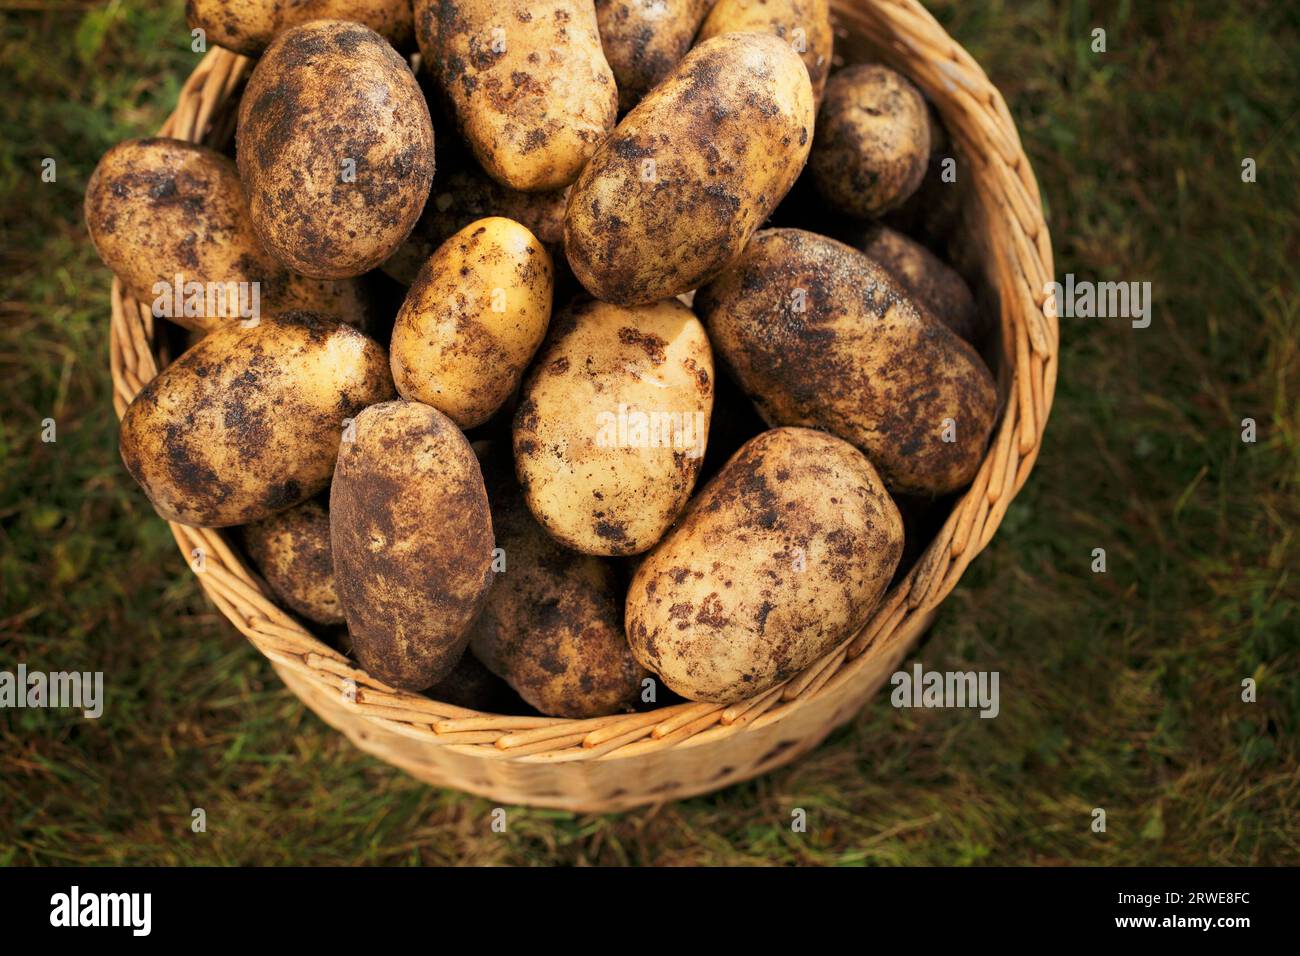 DIrty harvested potatoes in a wicker basket Stock Photo